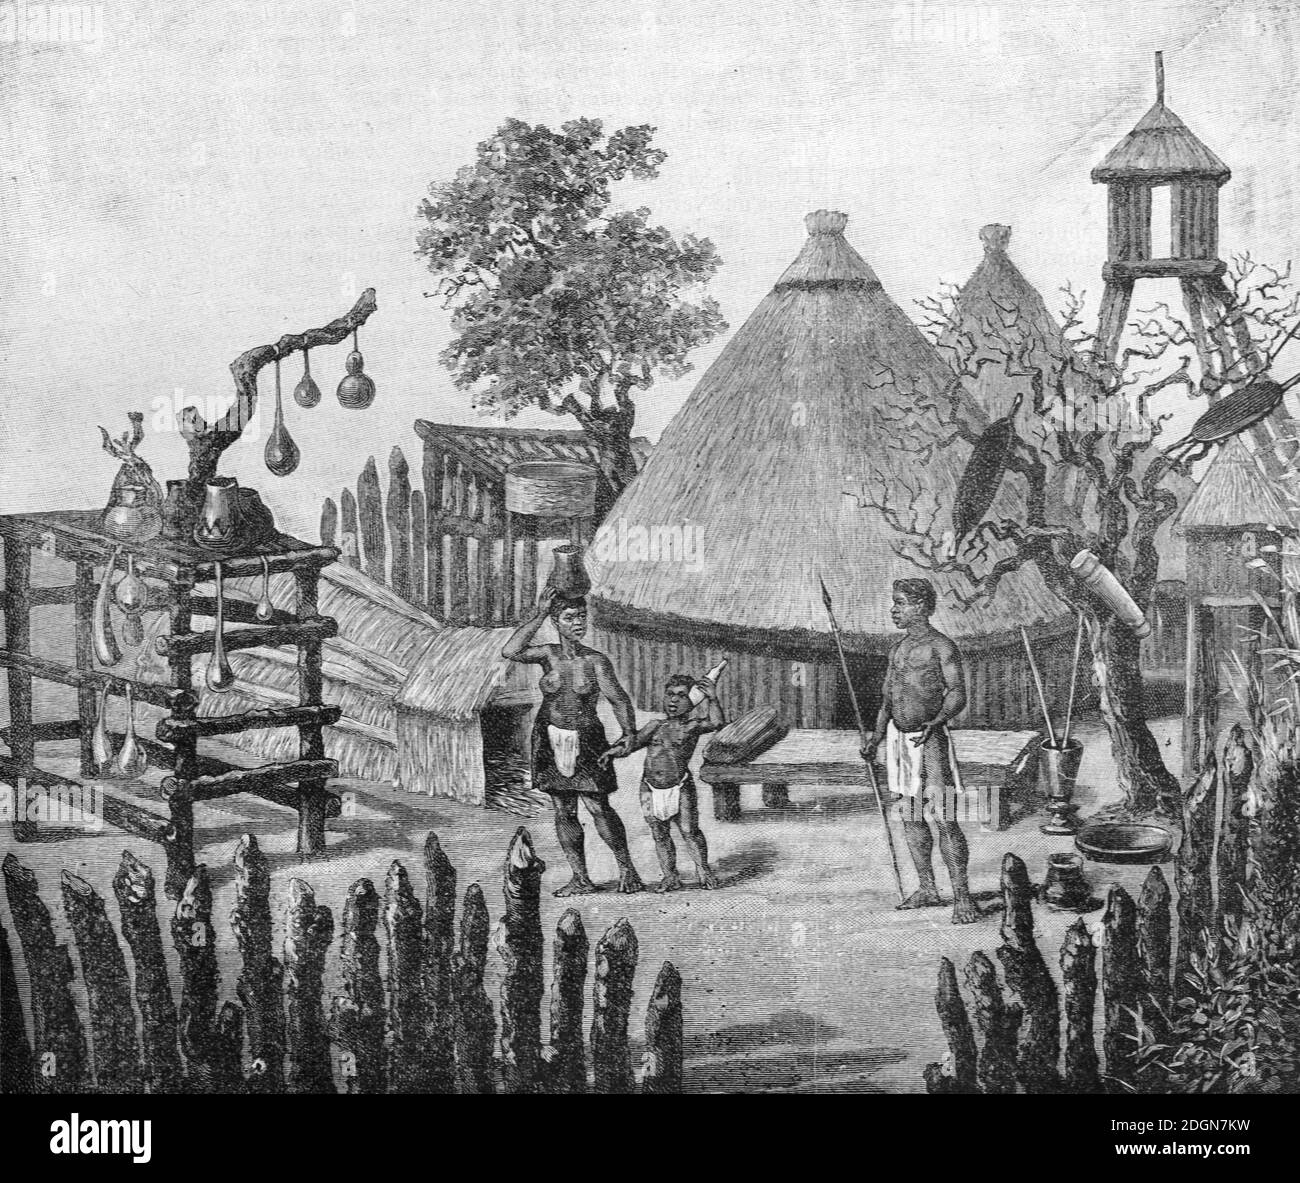 Mud Huts, Conical Huts oder traditionelle Conical Architecture of the Lunda People in Village on the Haute Zambezi Sambia Afrika (Engr 1895) Vintage Illustration oder Gravur Stockfoto